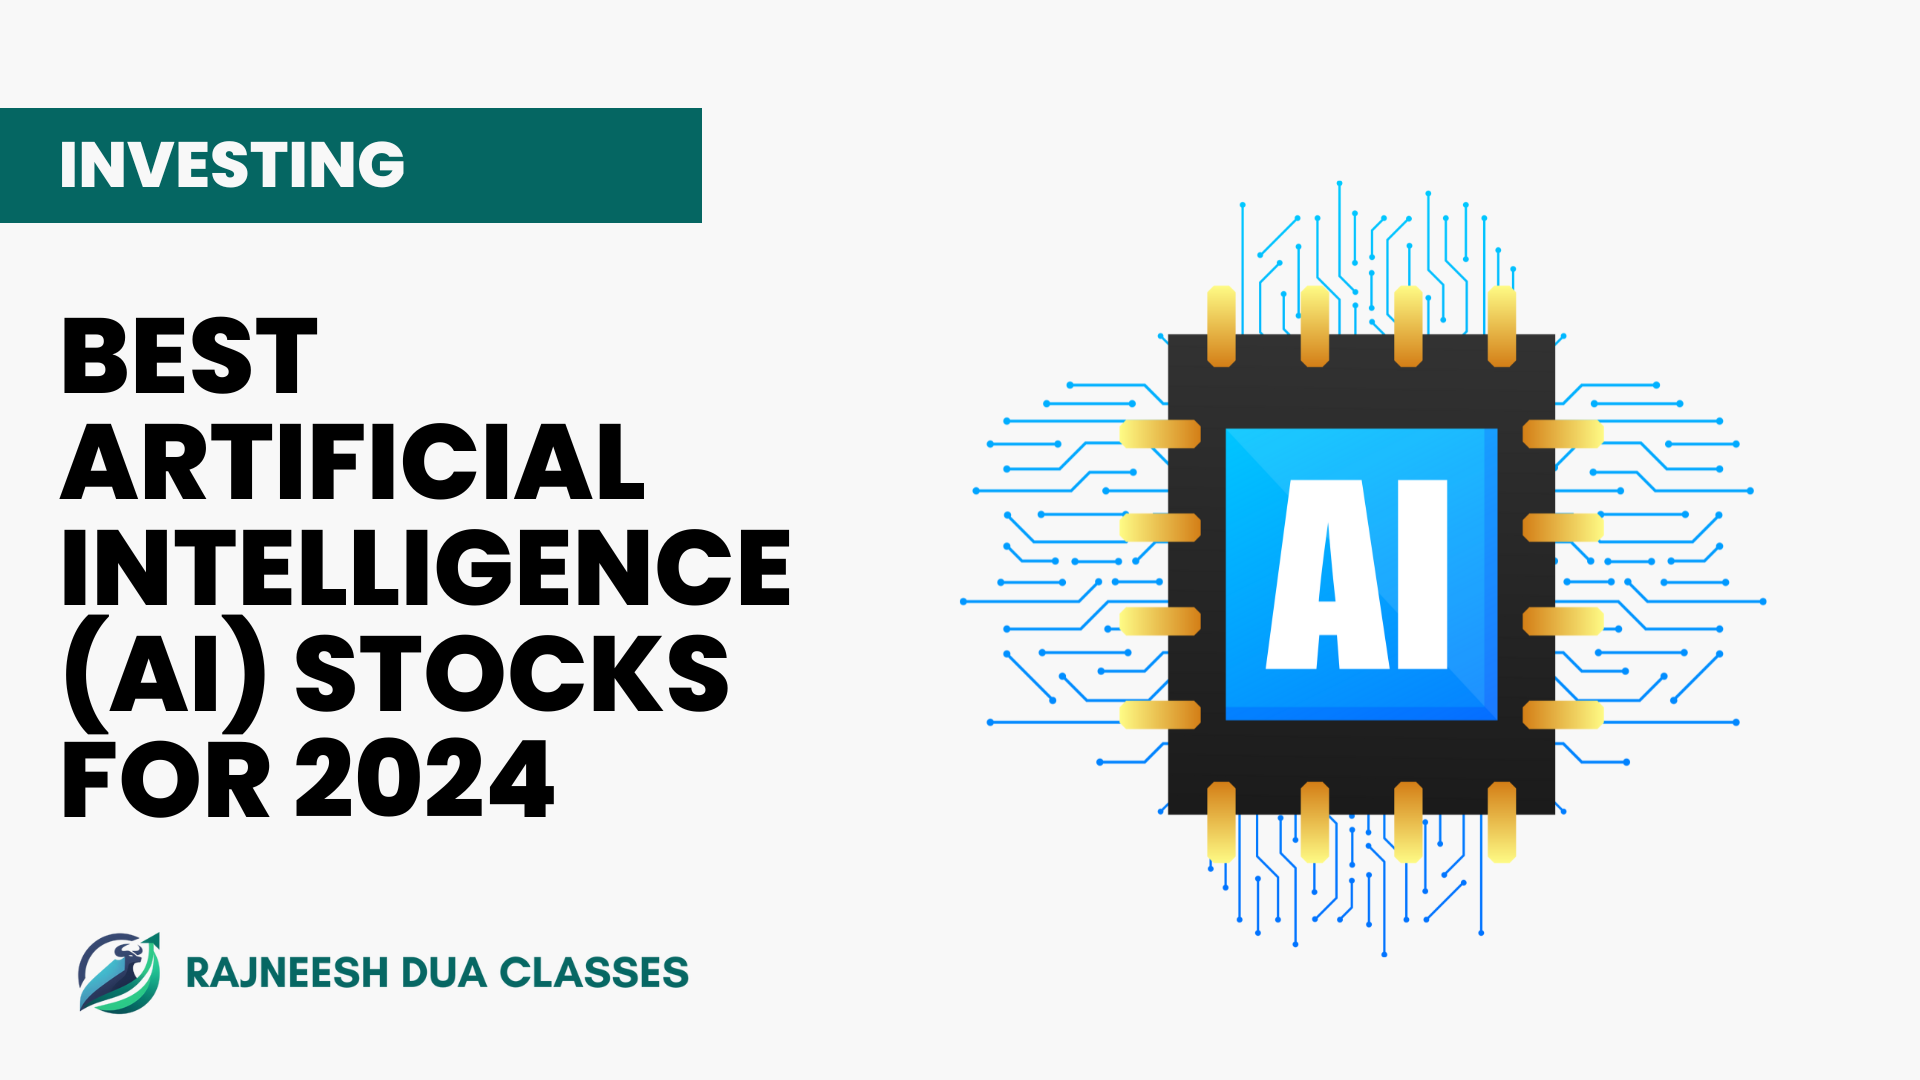 Best Artificial Intelligence (AI) Stocks for 2024